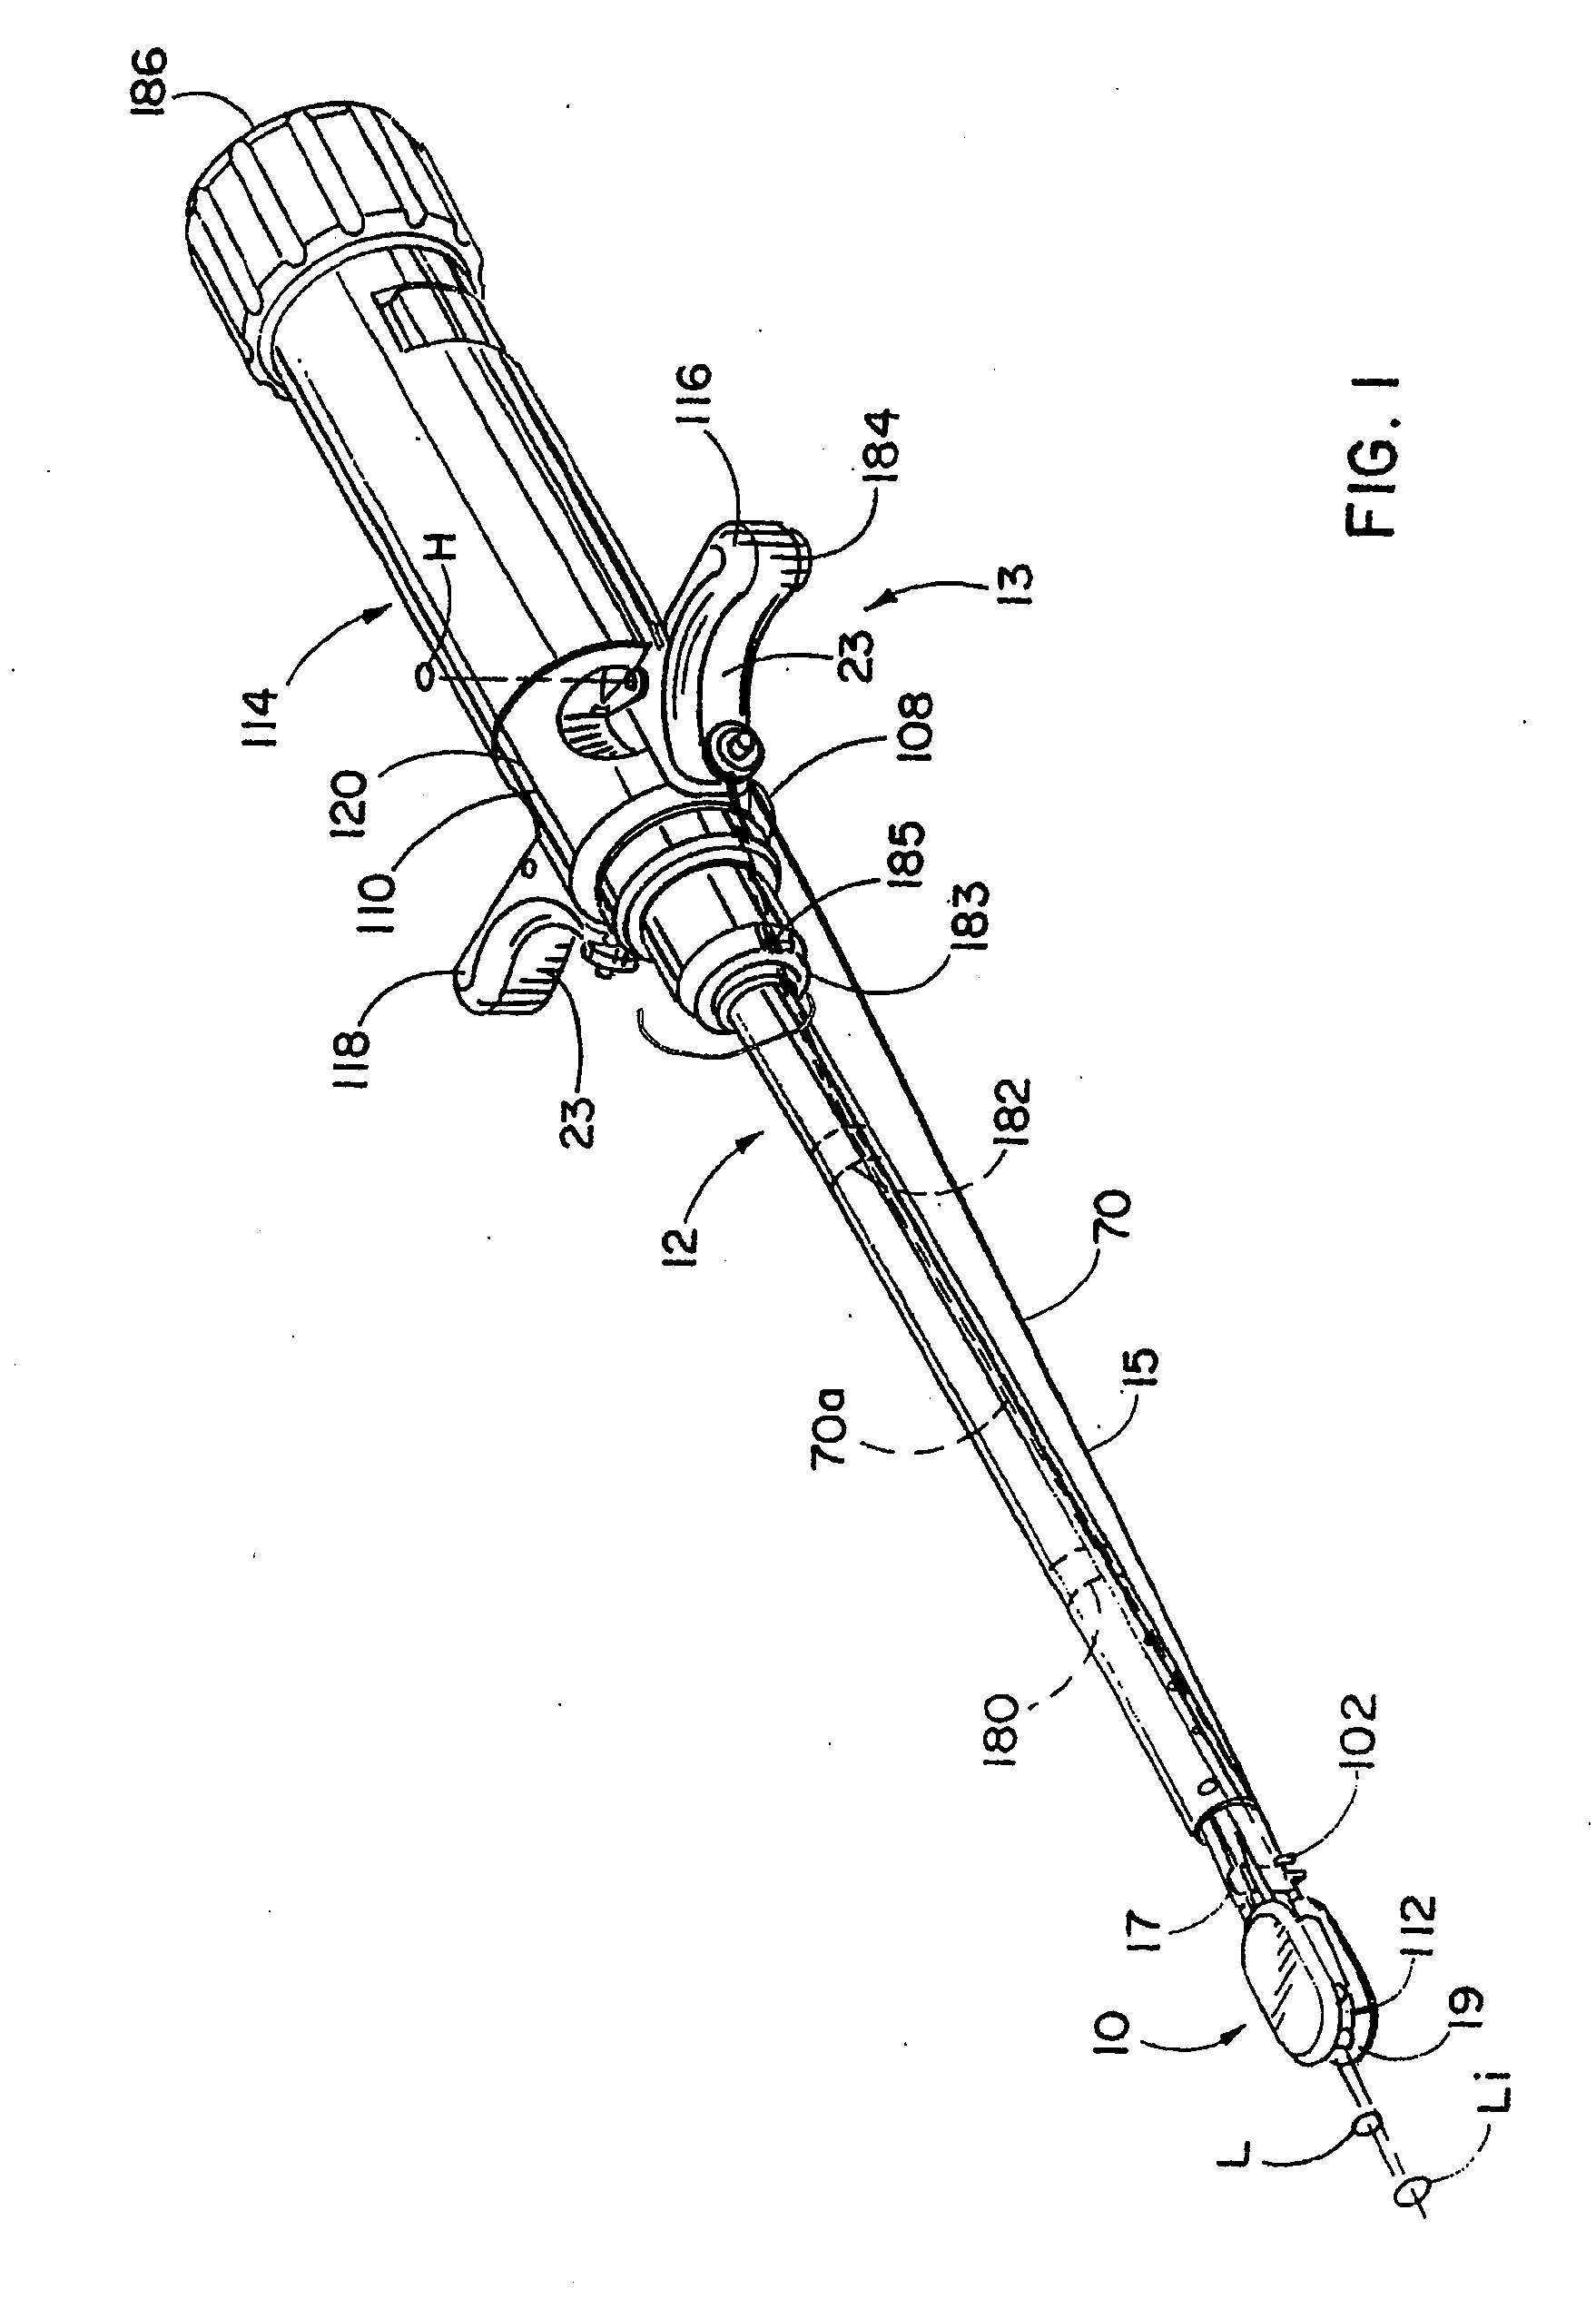 System and methods for inserting a spinal disc device into an intervertebral space